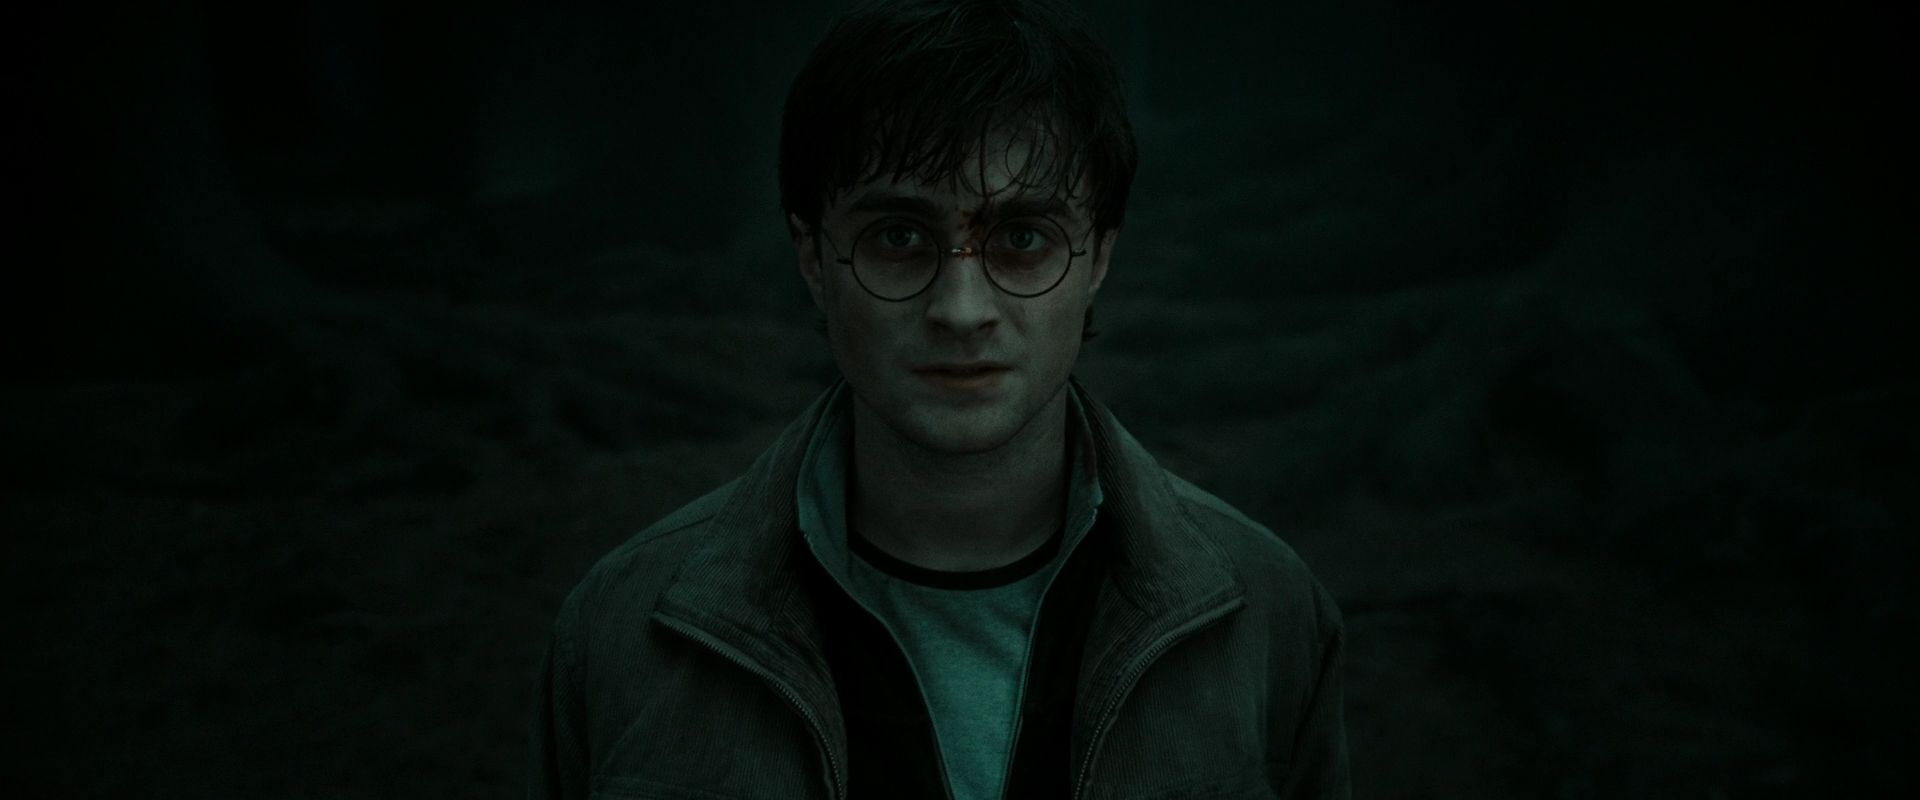 download harry and the deathly hallows part 2